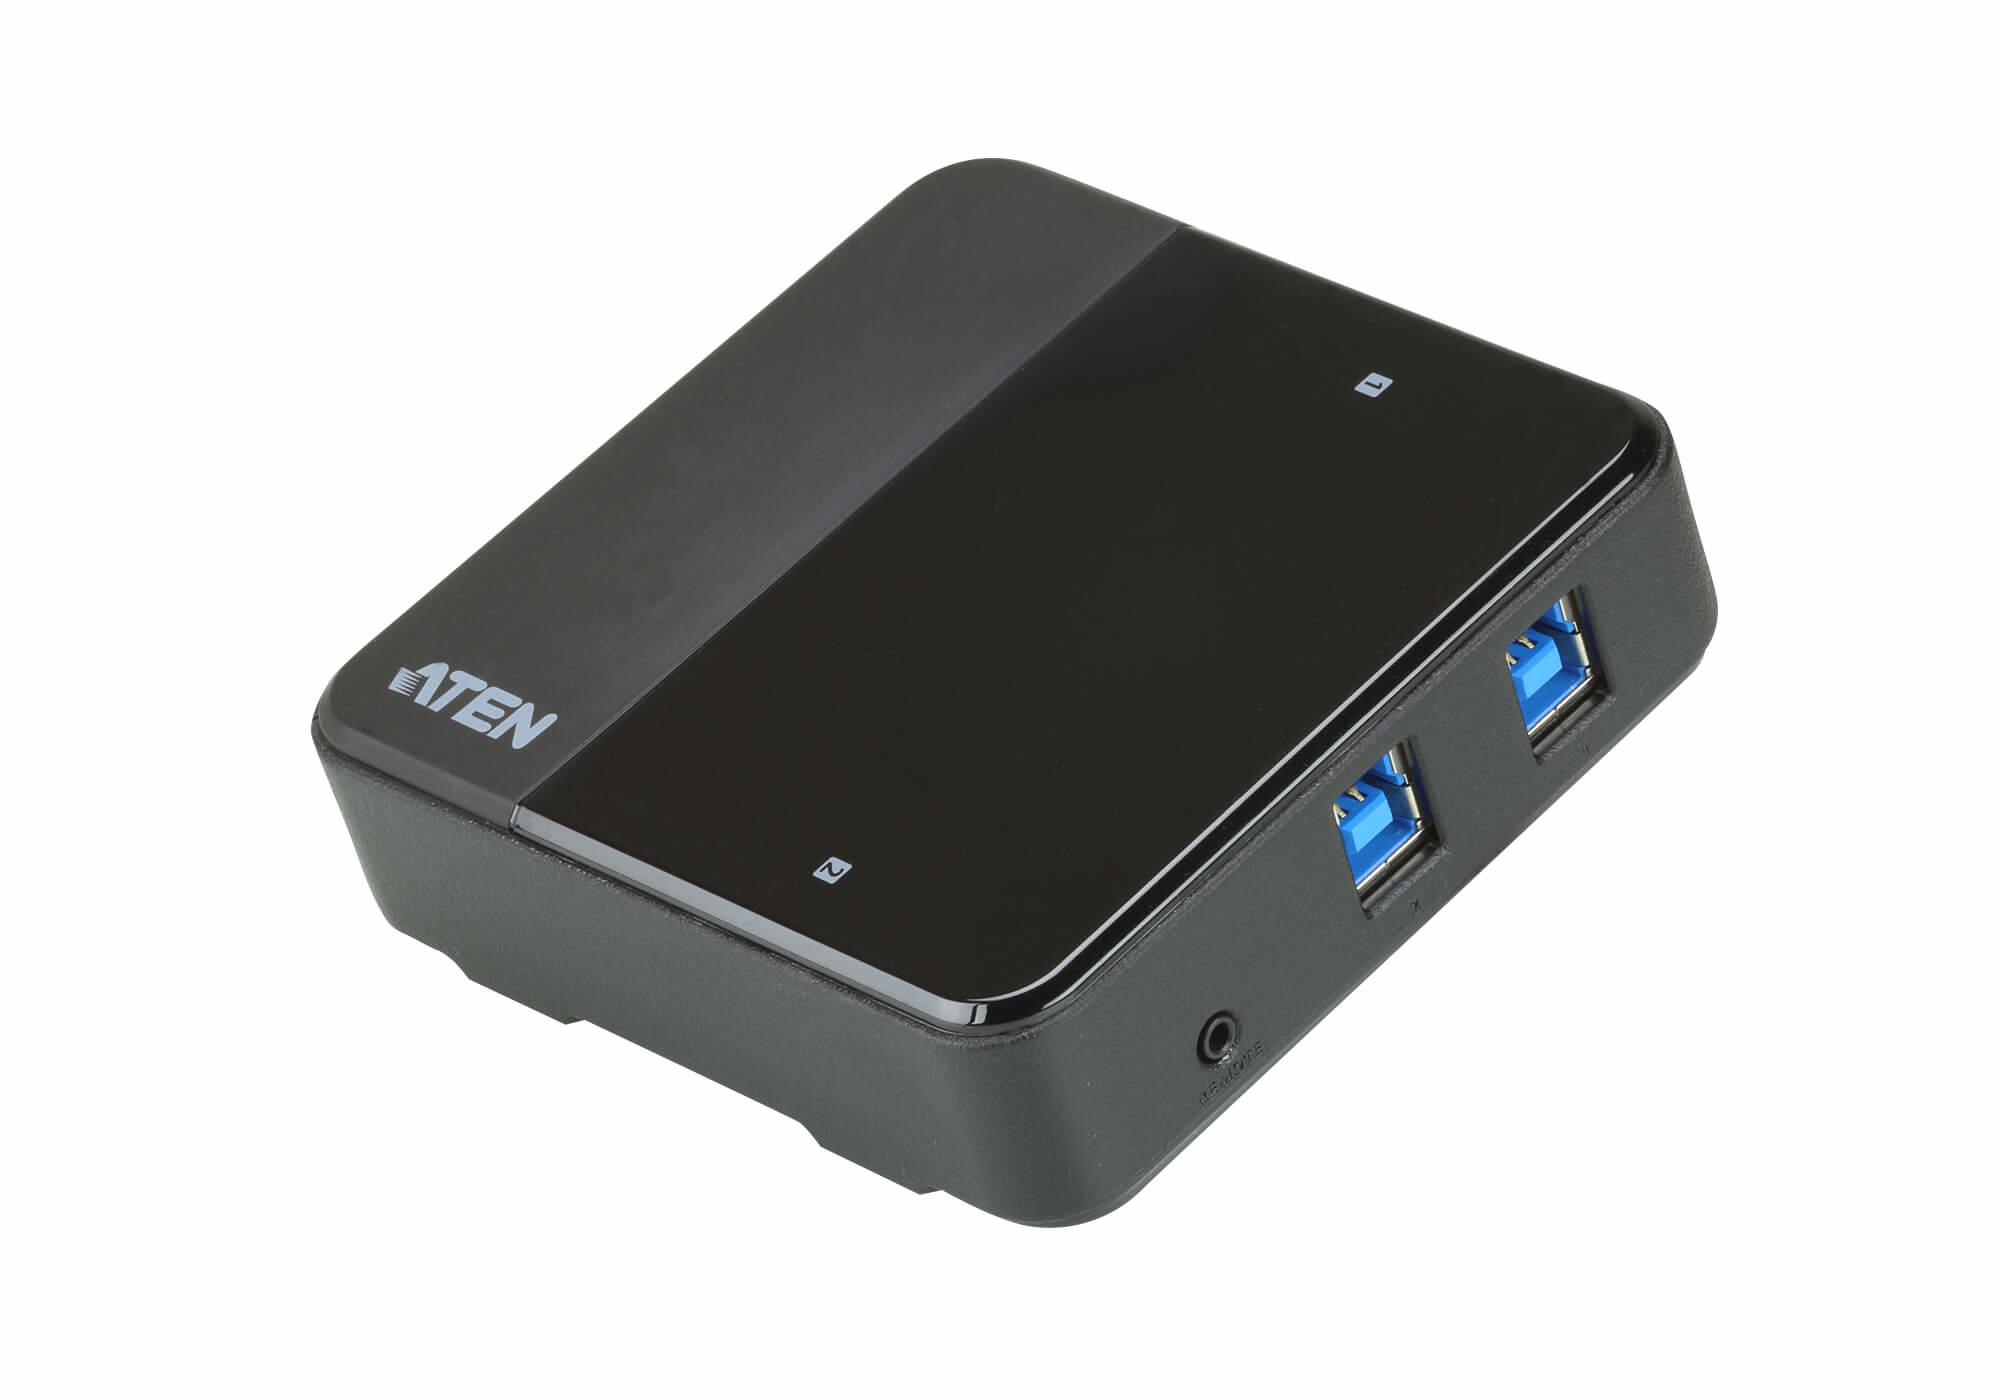 Us3324-at aten 2x4 Usb3.1 Switch - NA01